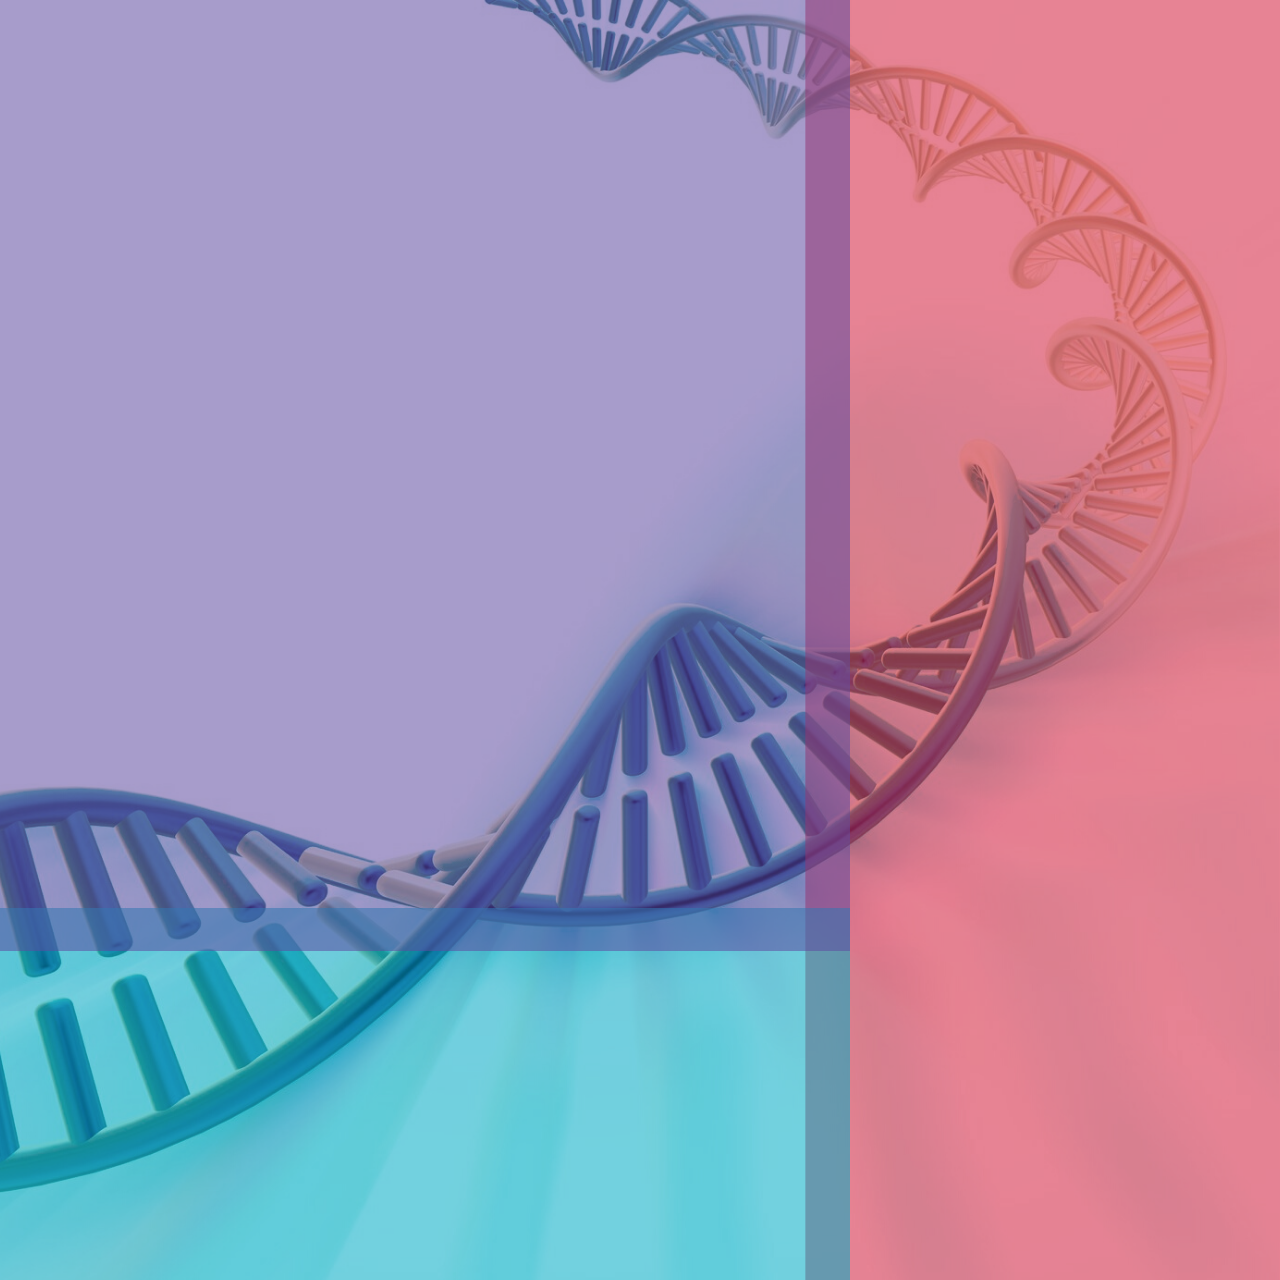 A DNA strand overlaid with the library's colors